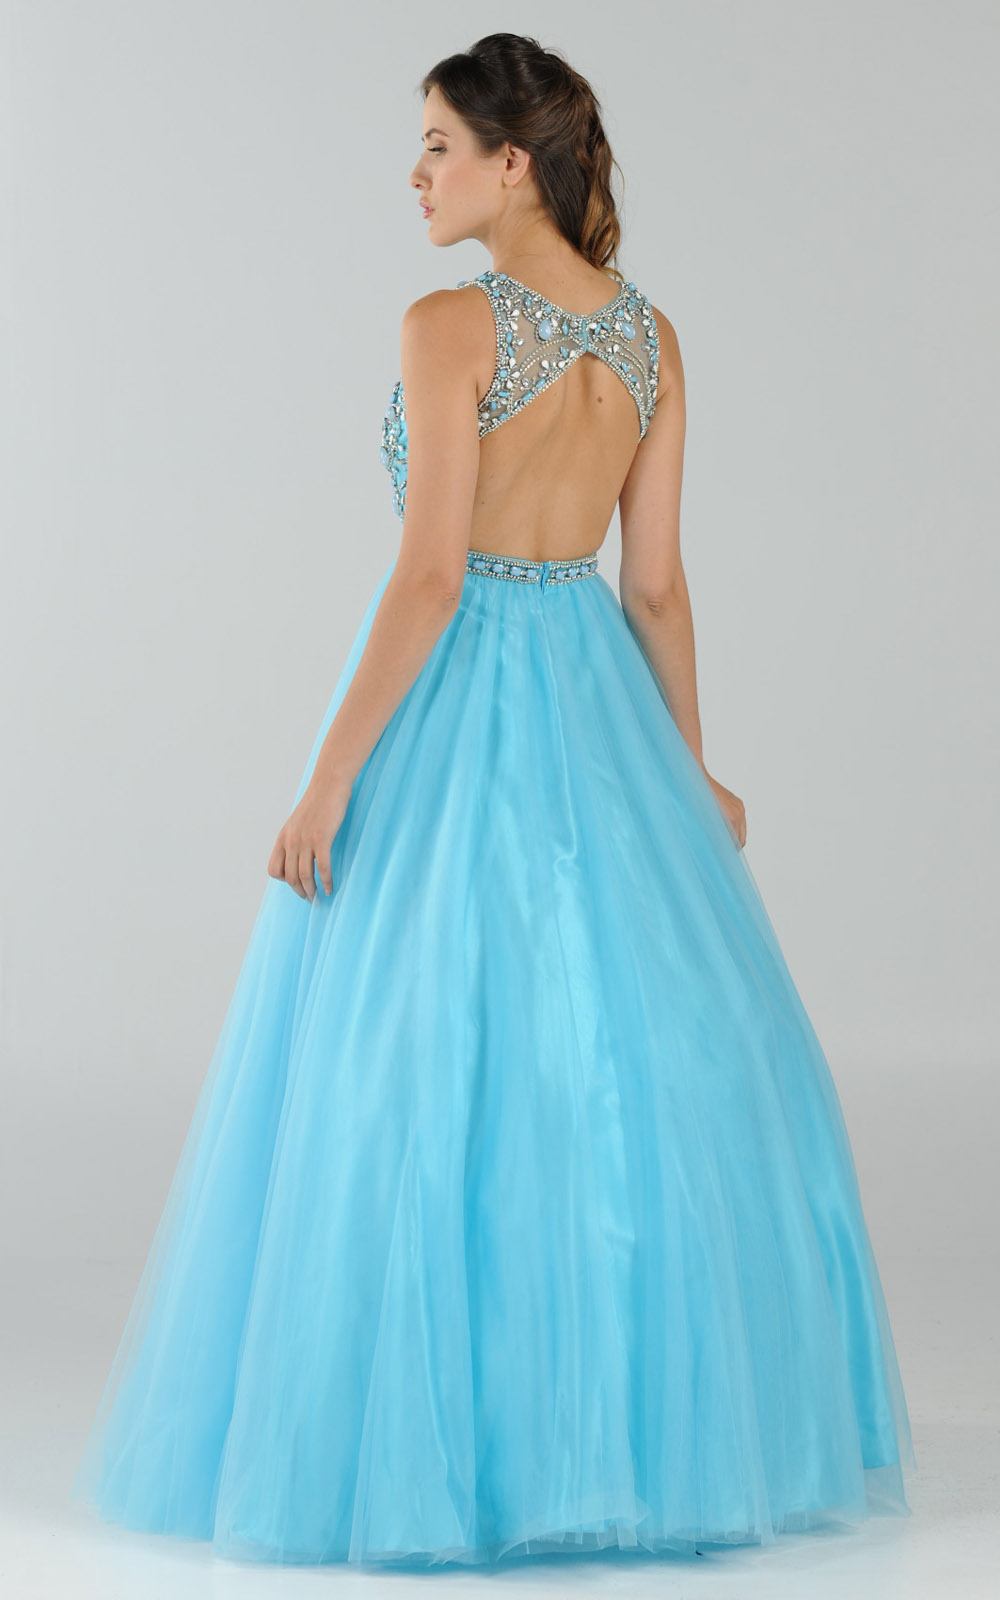 Poly USA 7940 Cut-Out Back Beaded Illusion Bodice Mesh Ball Gown Sleeveless Blue Back View